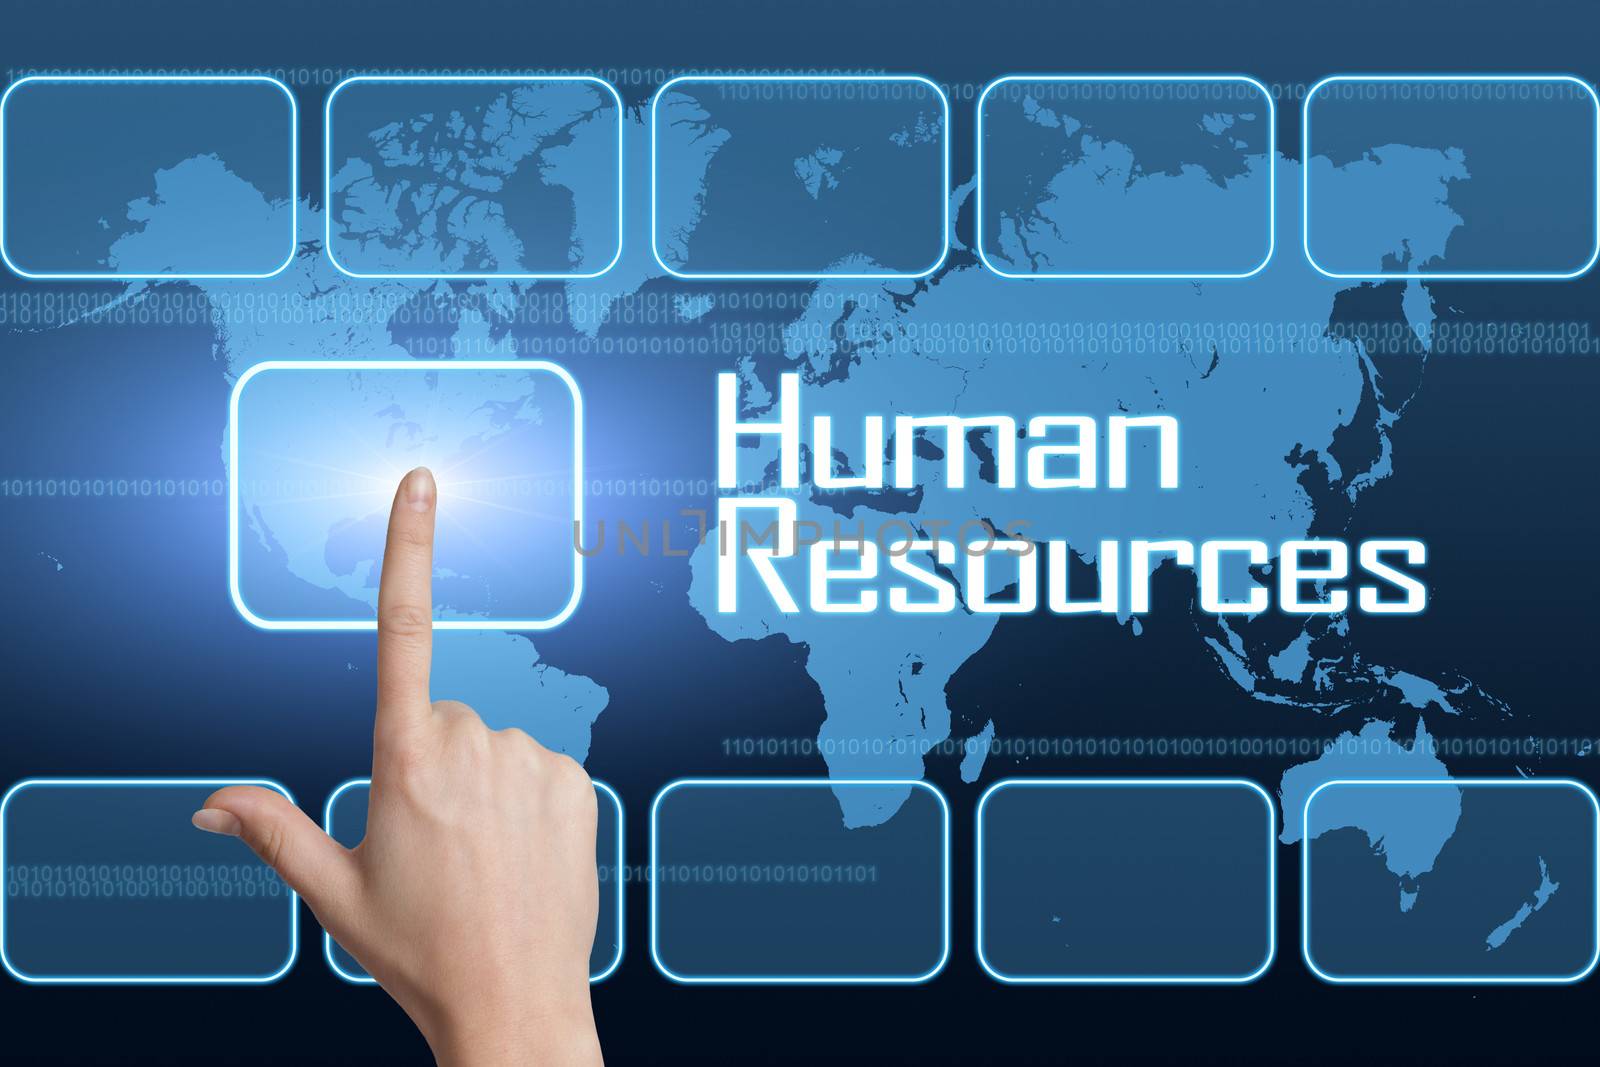 Human Resources concept with interface and world map on blue background